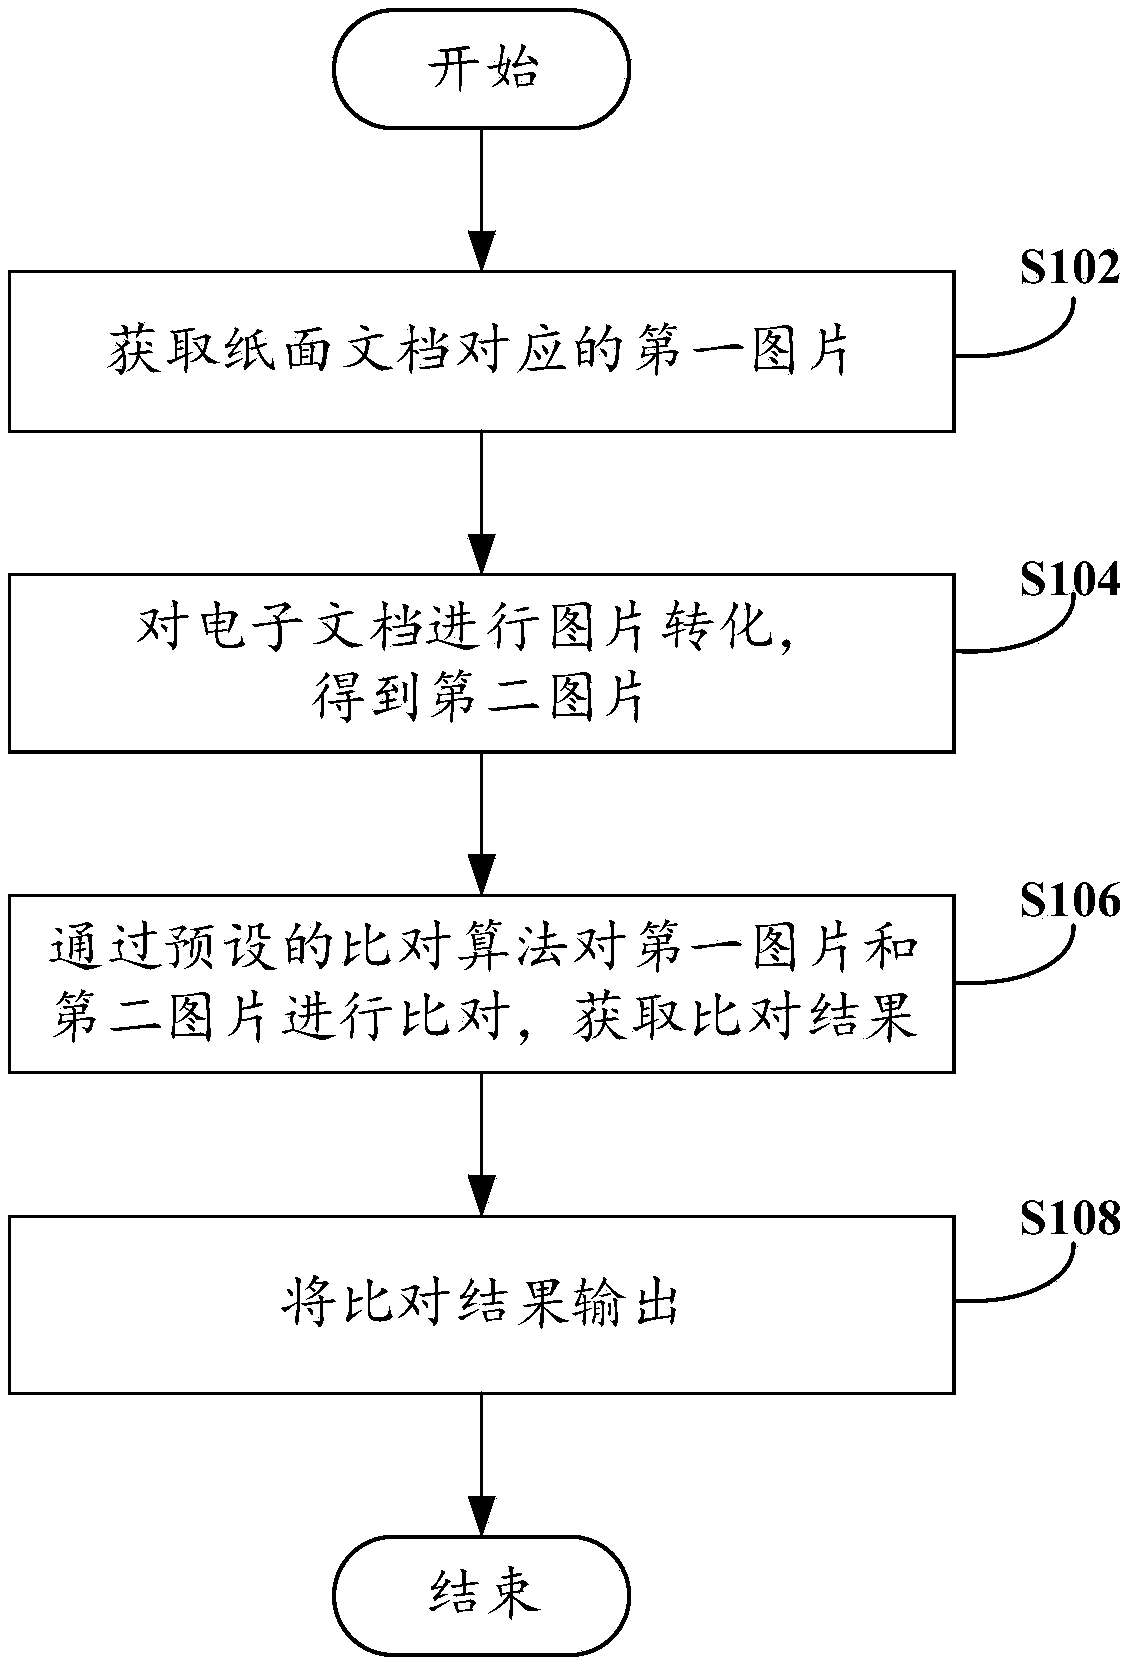 Contrast method, device and system of paper document and electronic document